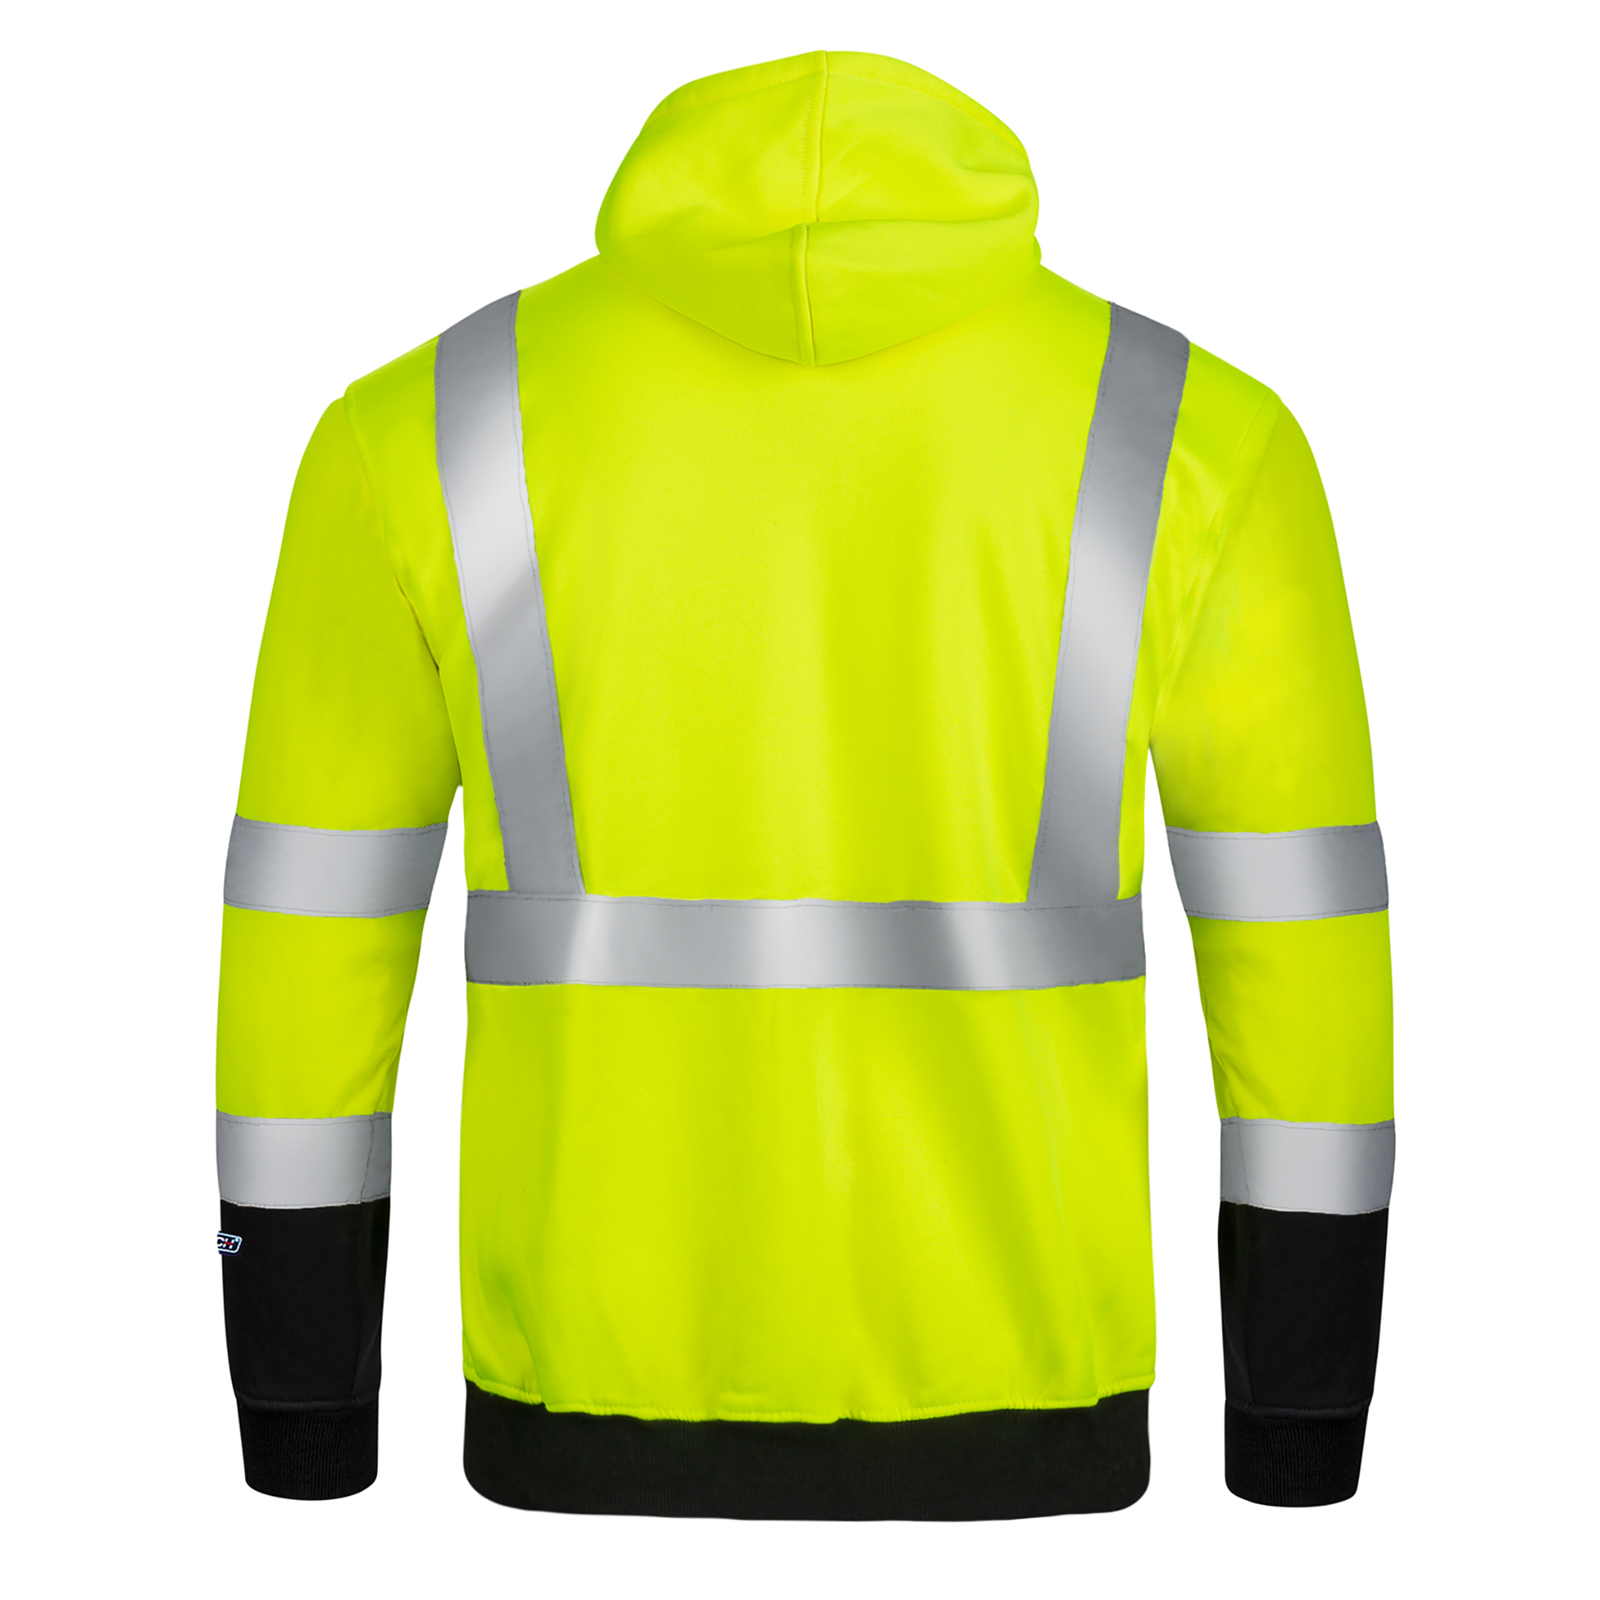 Back view of the JORESTECH hi-vis safety hooded yellow and black sweatshirt with reflective stripes